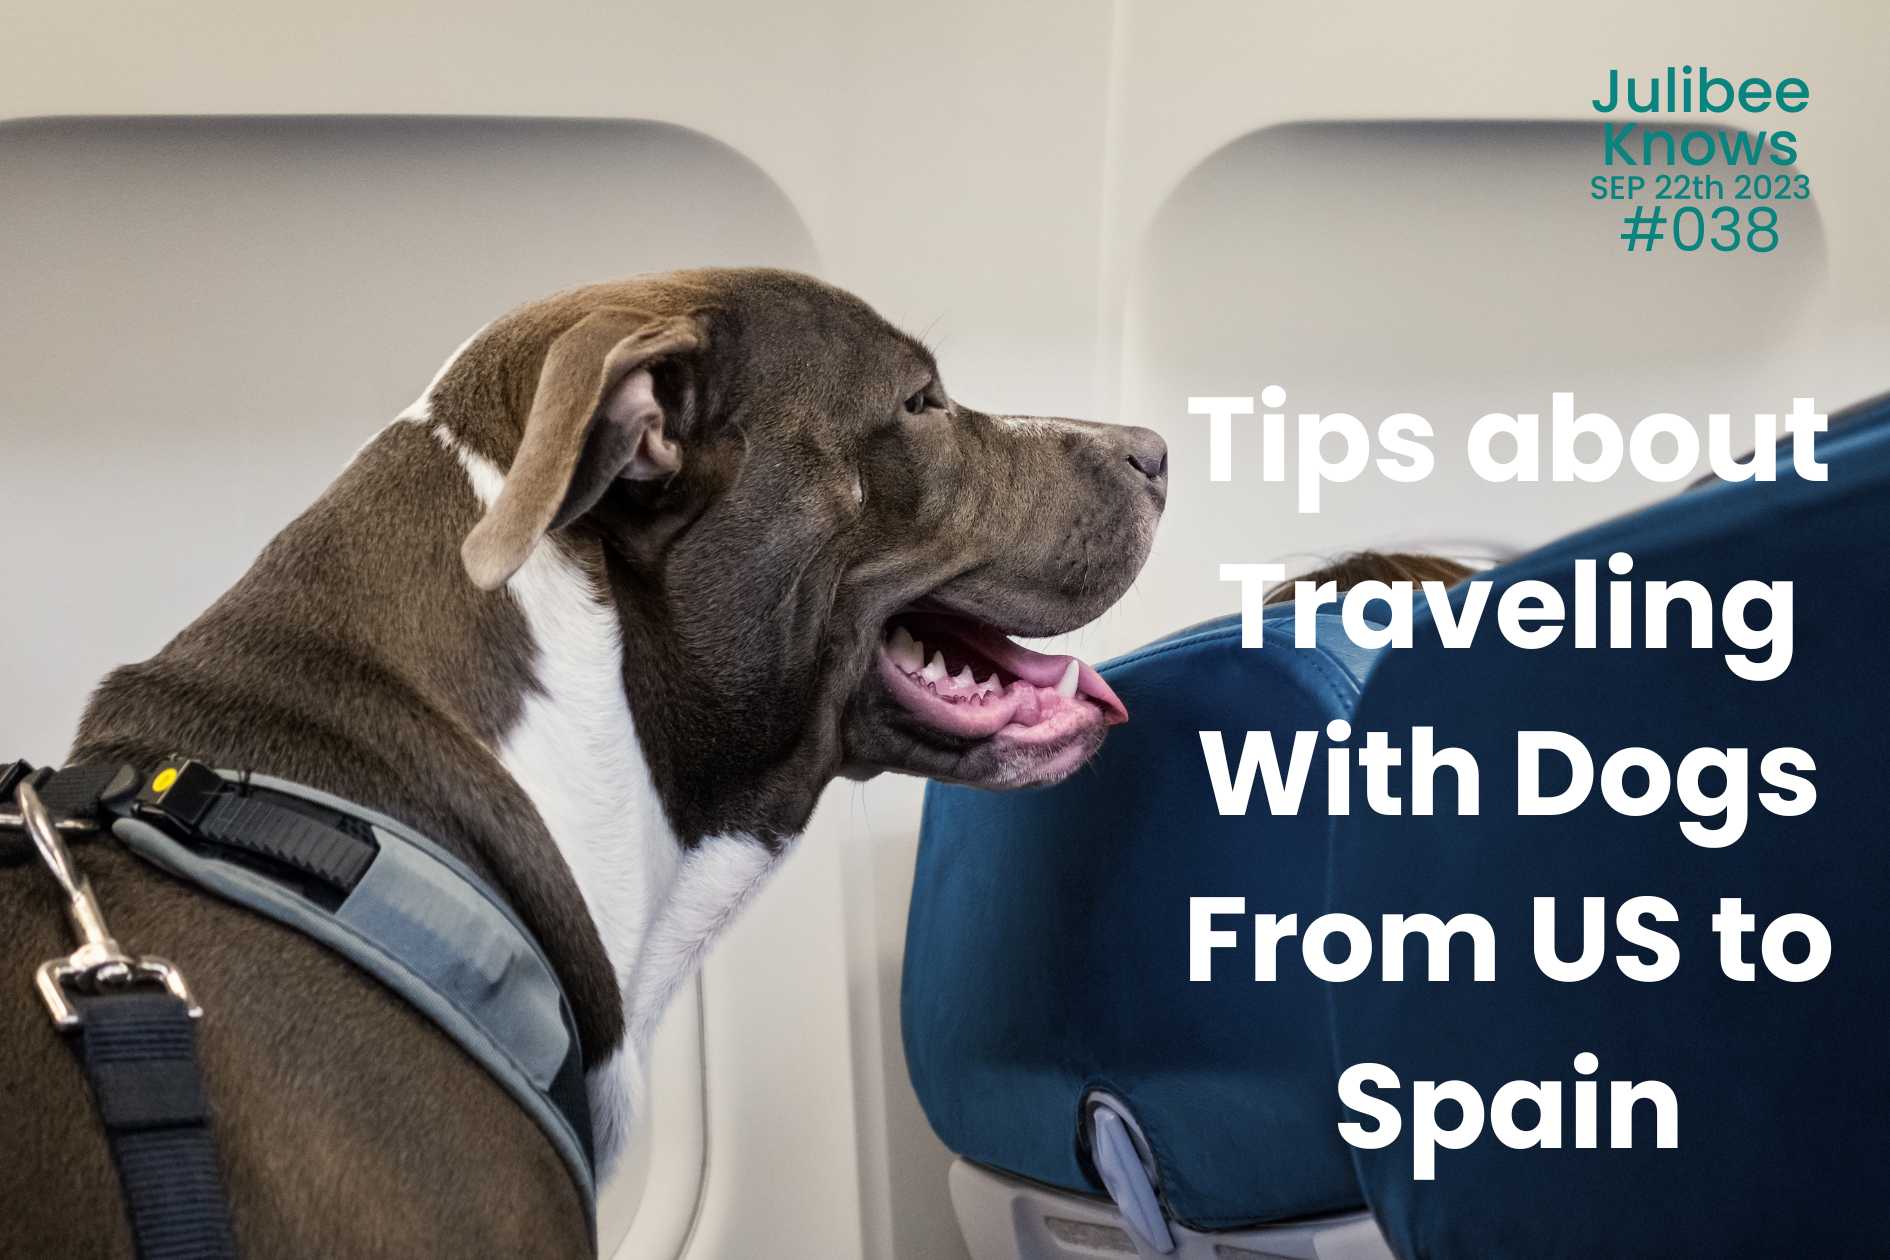 Airlines recommendation about Traveling With Dogs From US to Spain